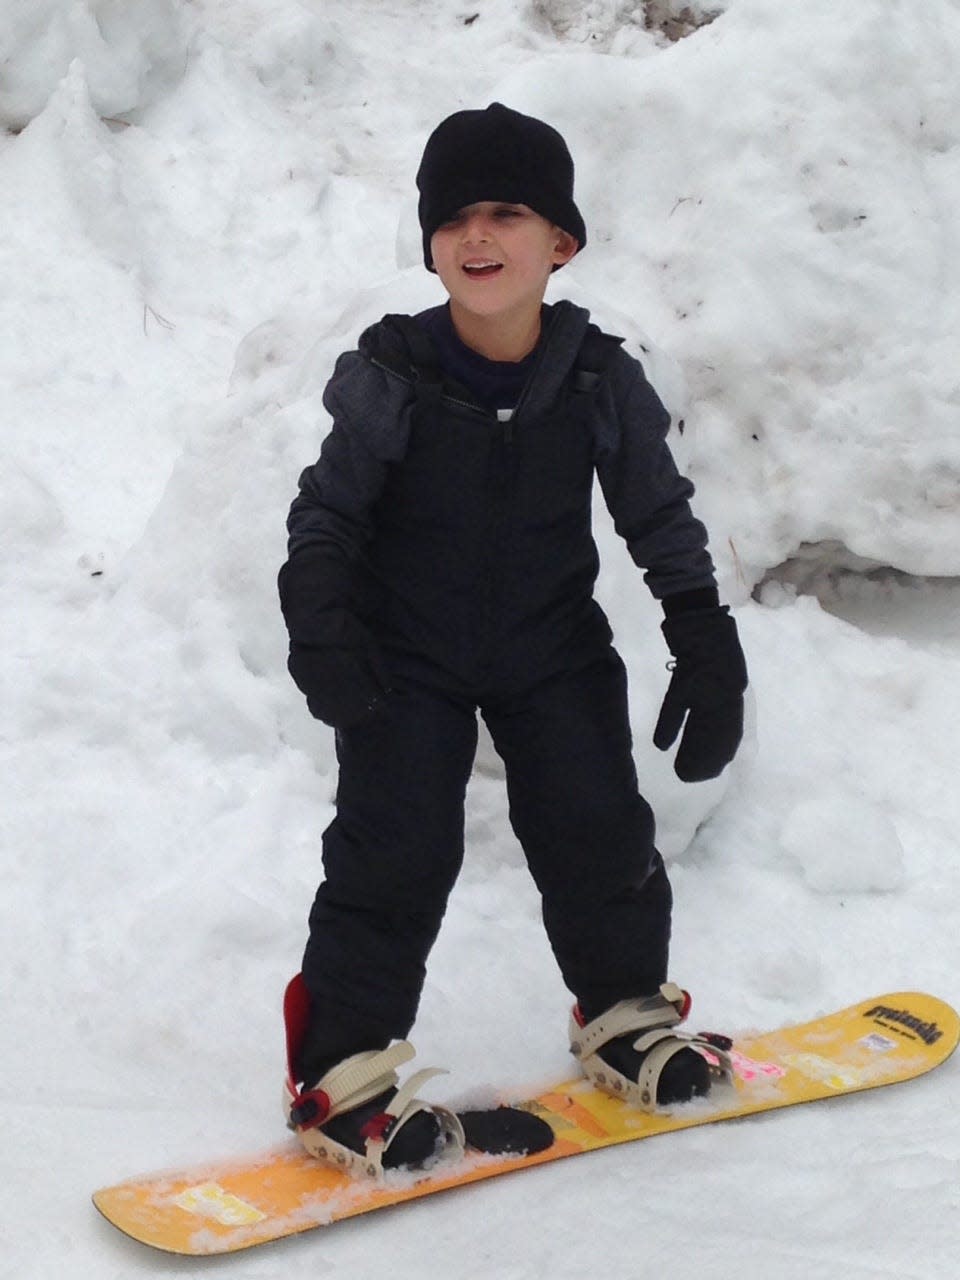 Grandson Jack on his first snowboarding outing at Calaveras Big Trees State Park.